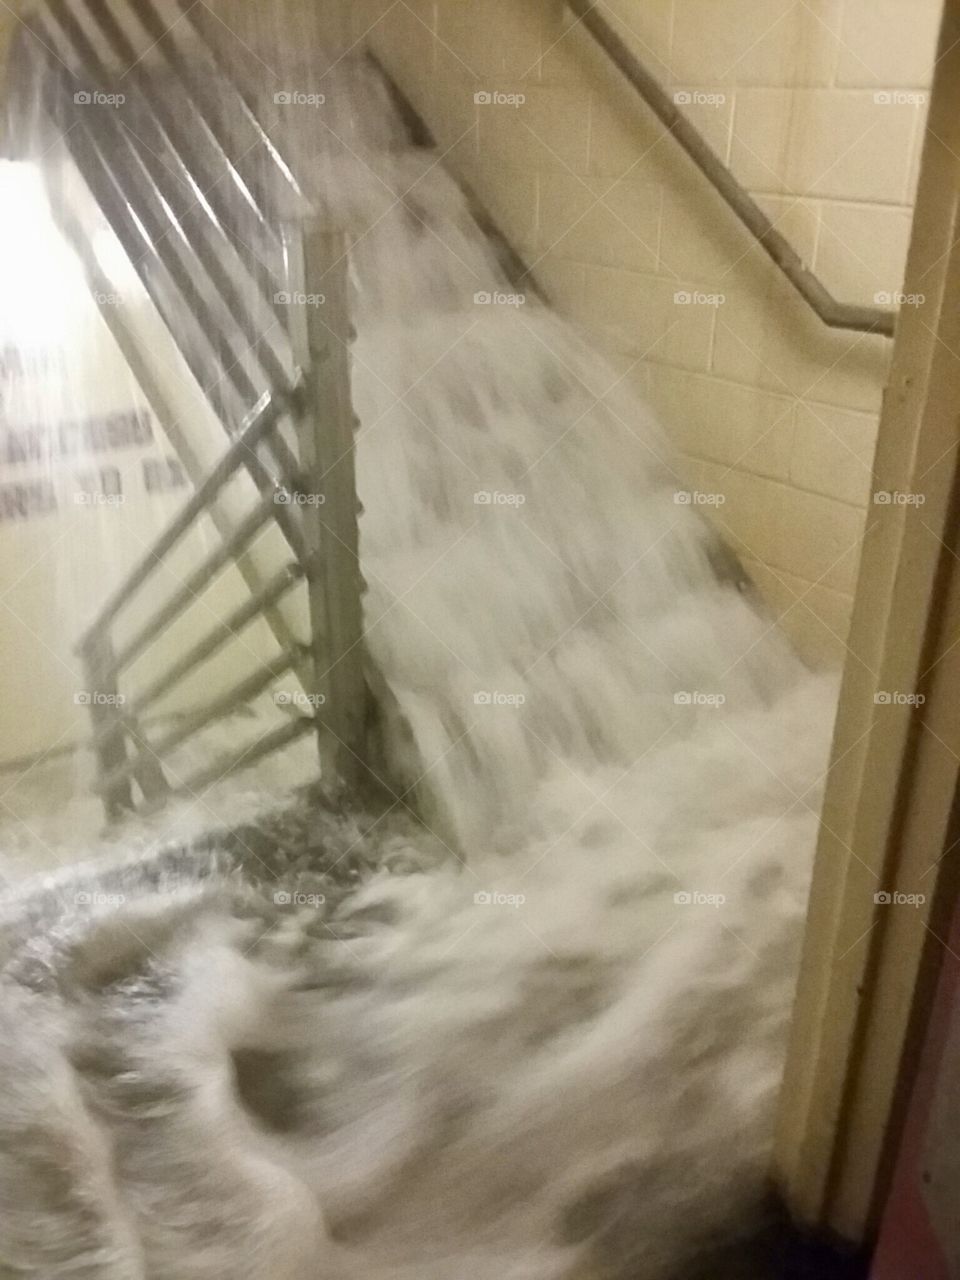 Water falls in the exit. No where to run no where to hide.